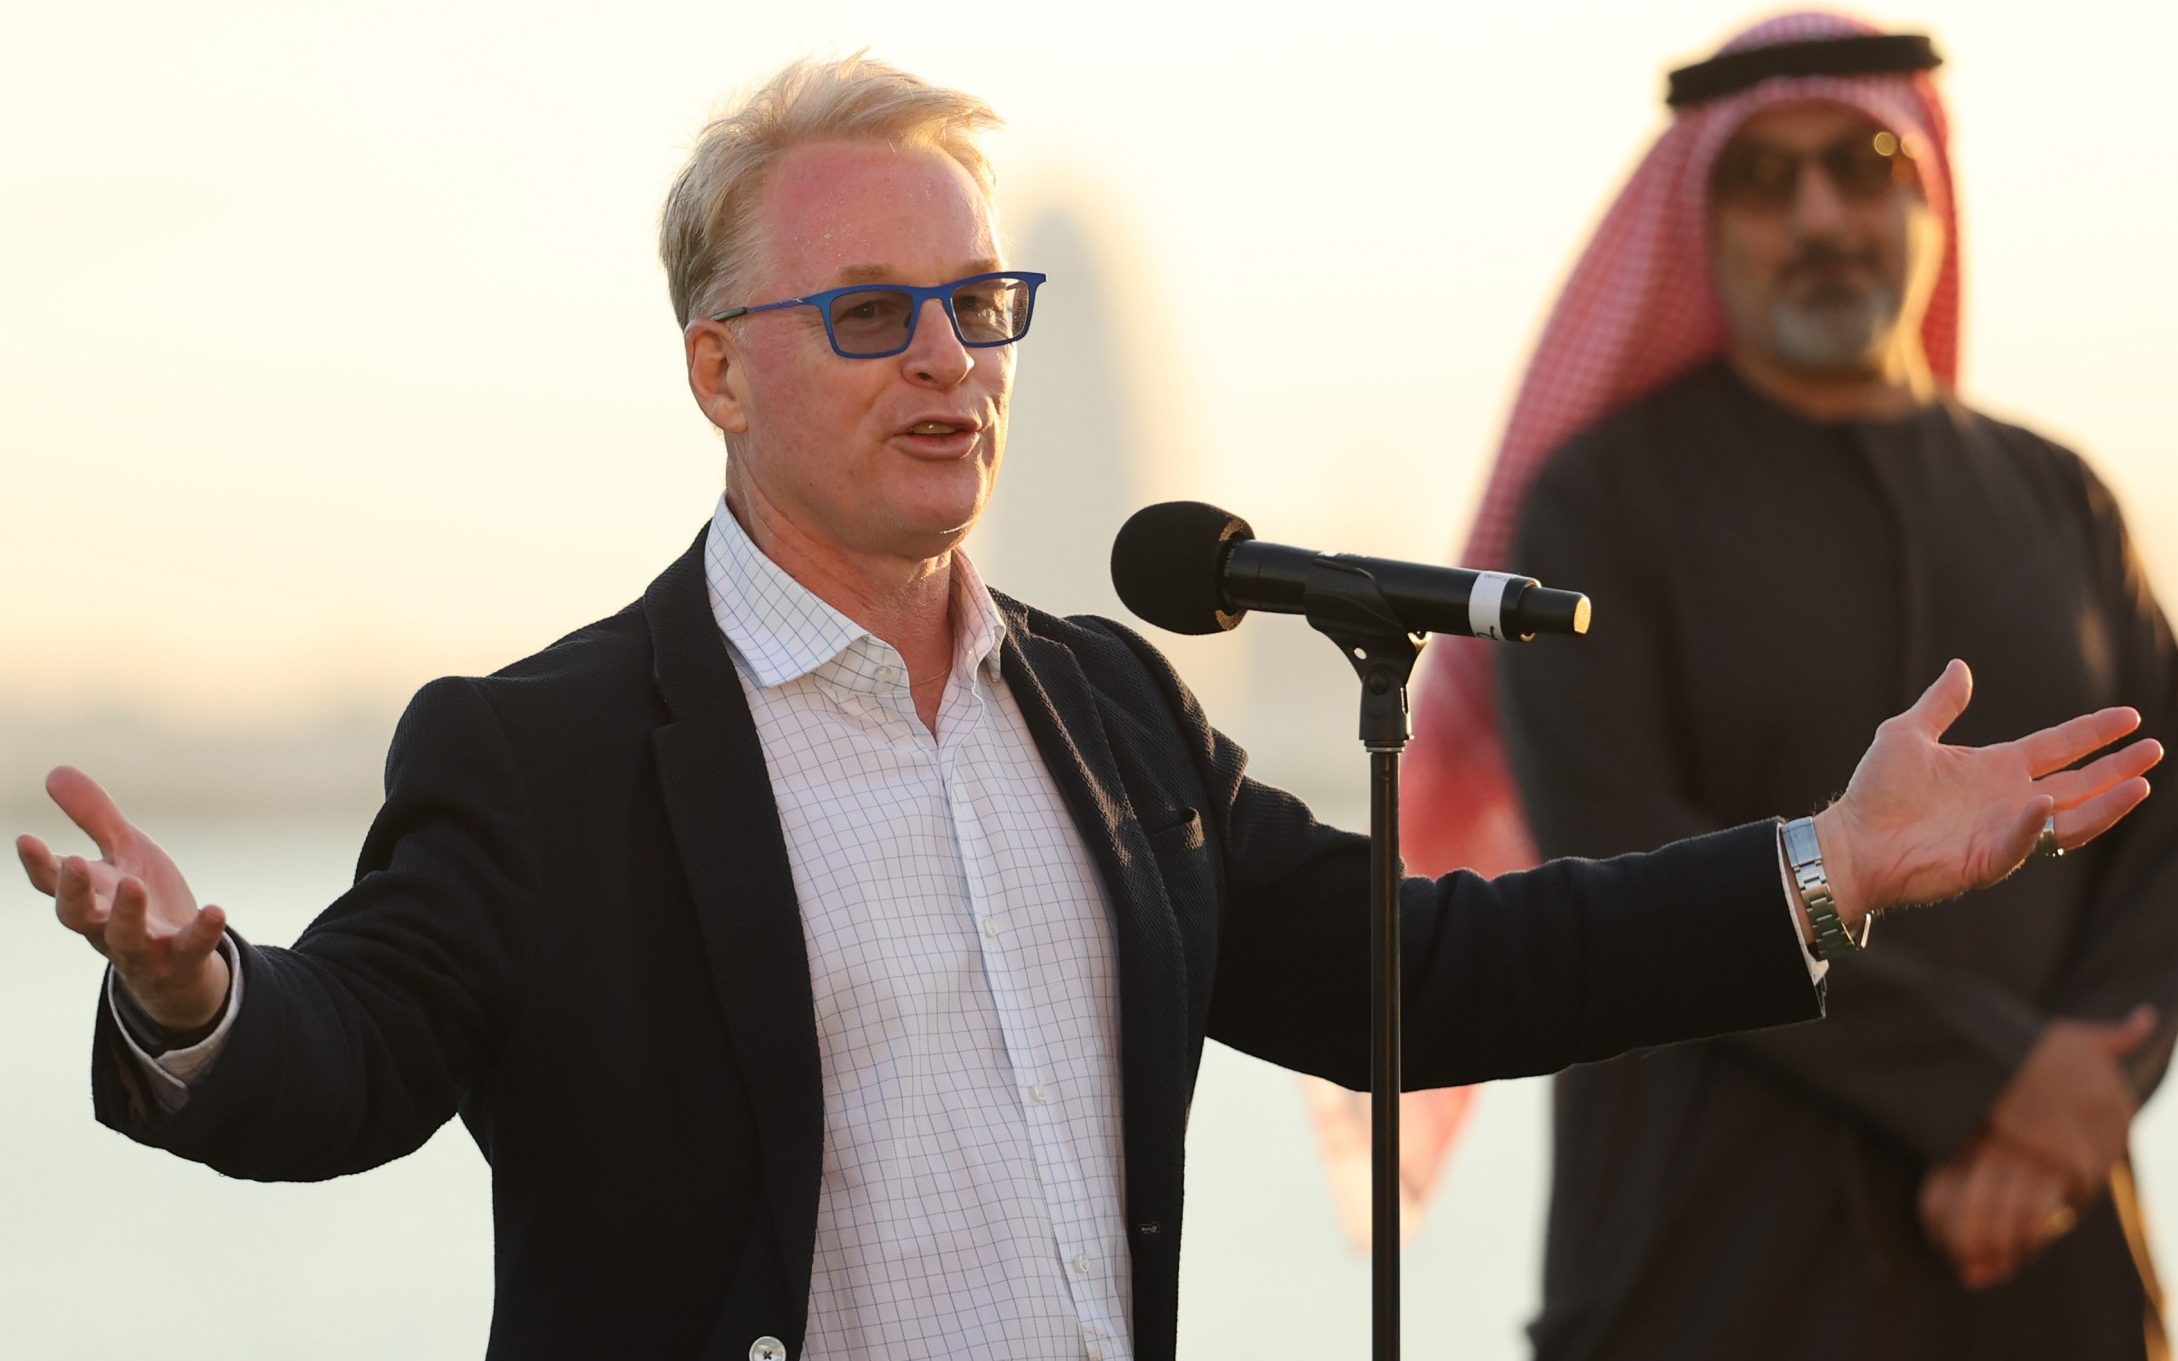 dp world tour swift to appoint keith pelley successor as chaos engulfs golf